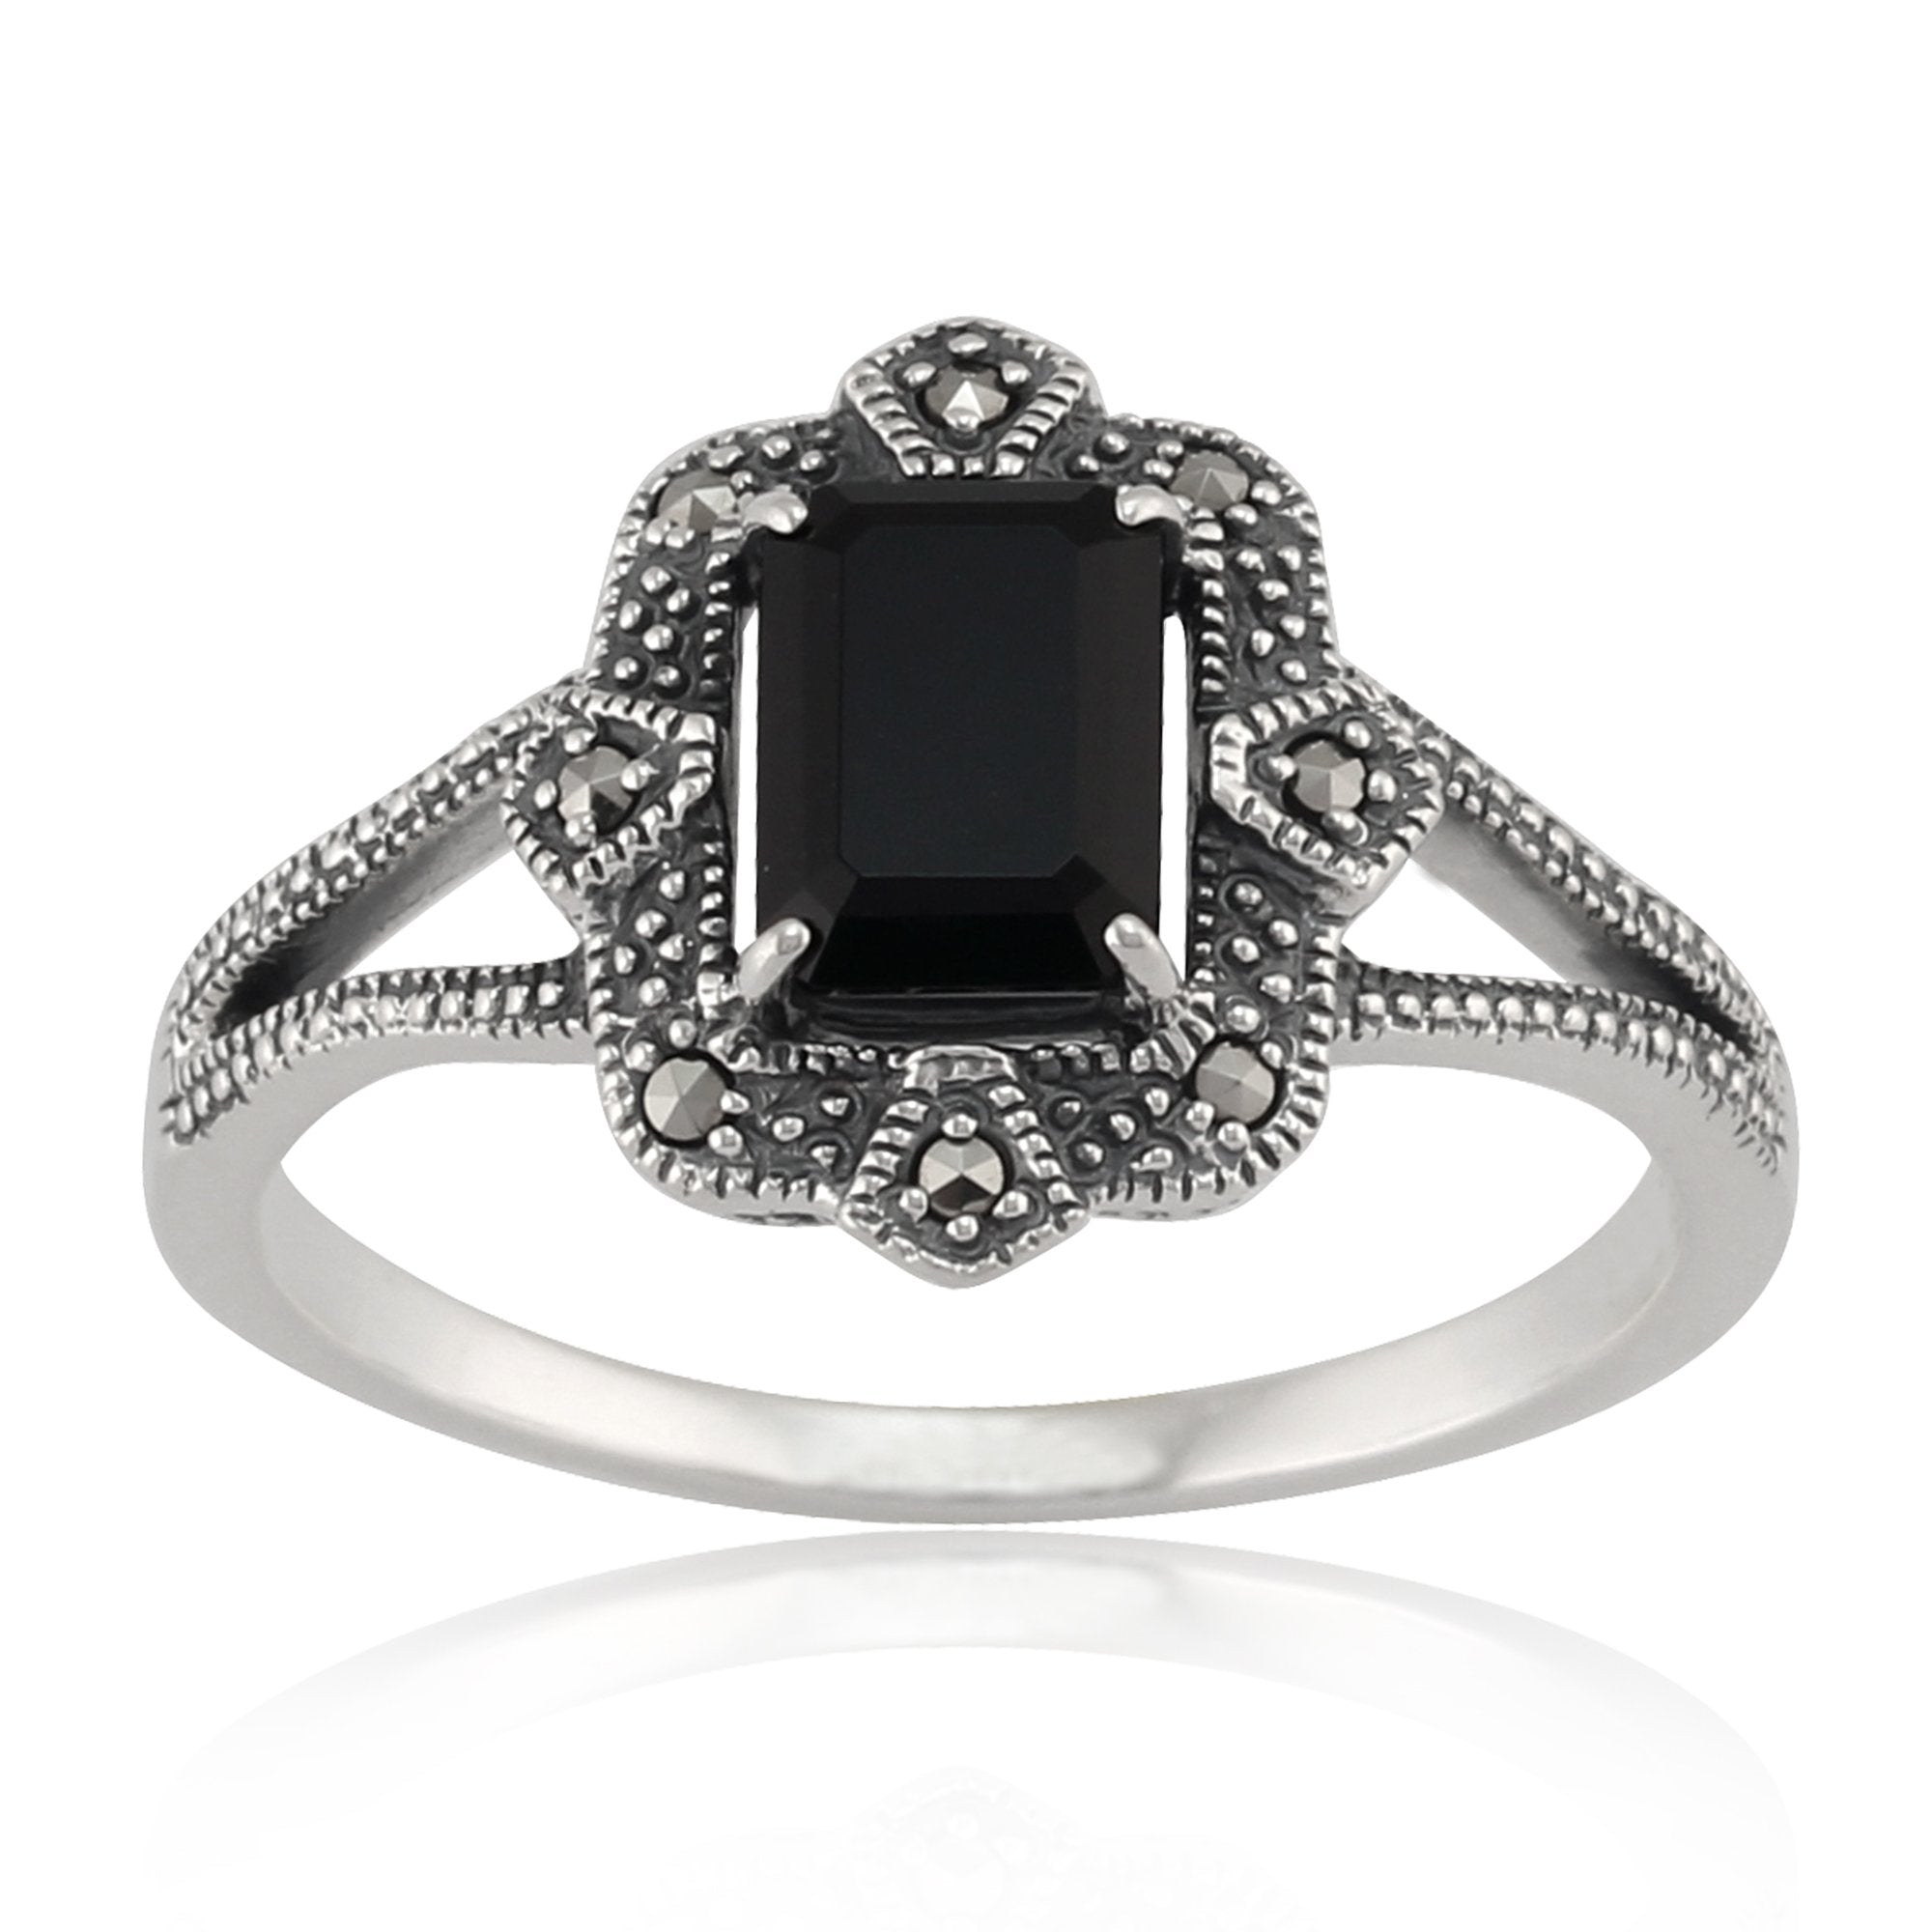 Art Deco Style Baguette Black Spinel & Marcasite Ring in 925 Sterling Silver